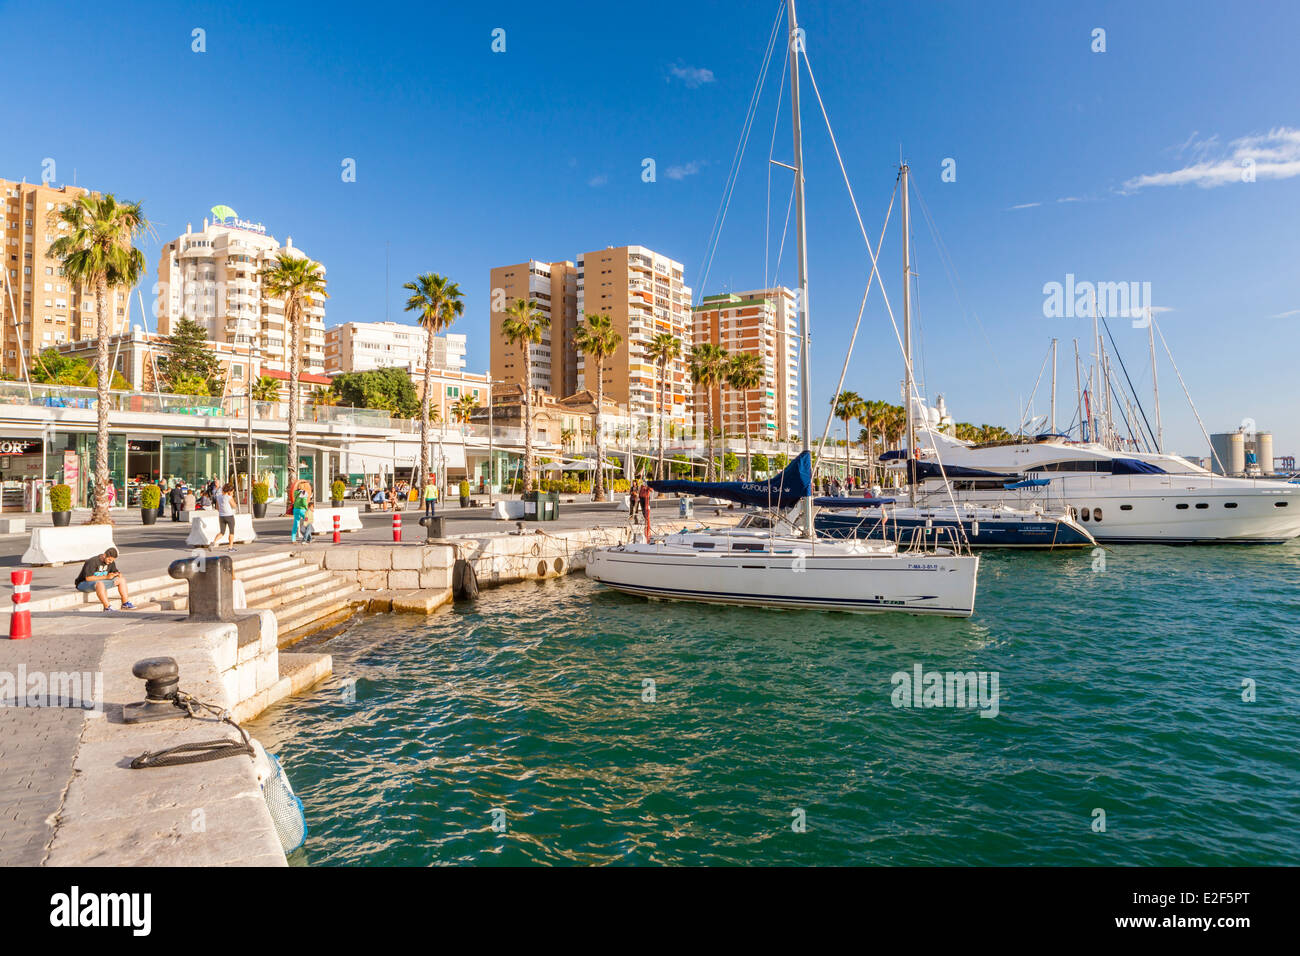 The yacht harbour of Puerto Banús, Marbella, Málaga, Costa del Sol, Andalusia, Spain, Europe. Stock Photo